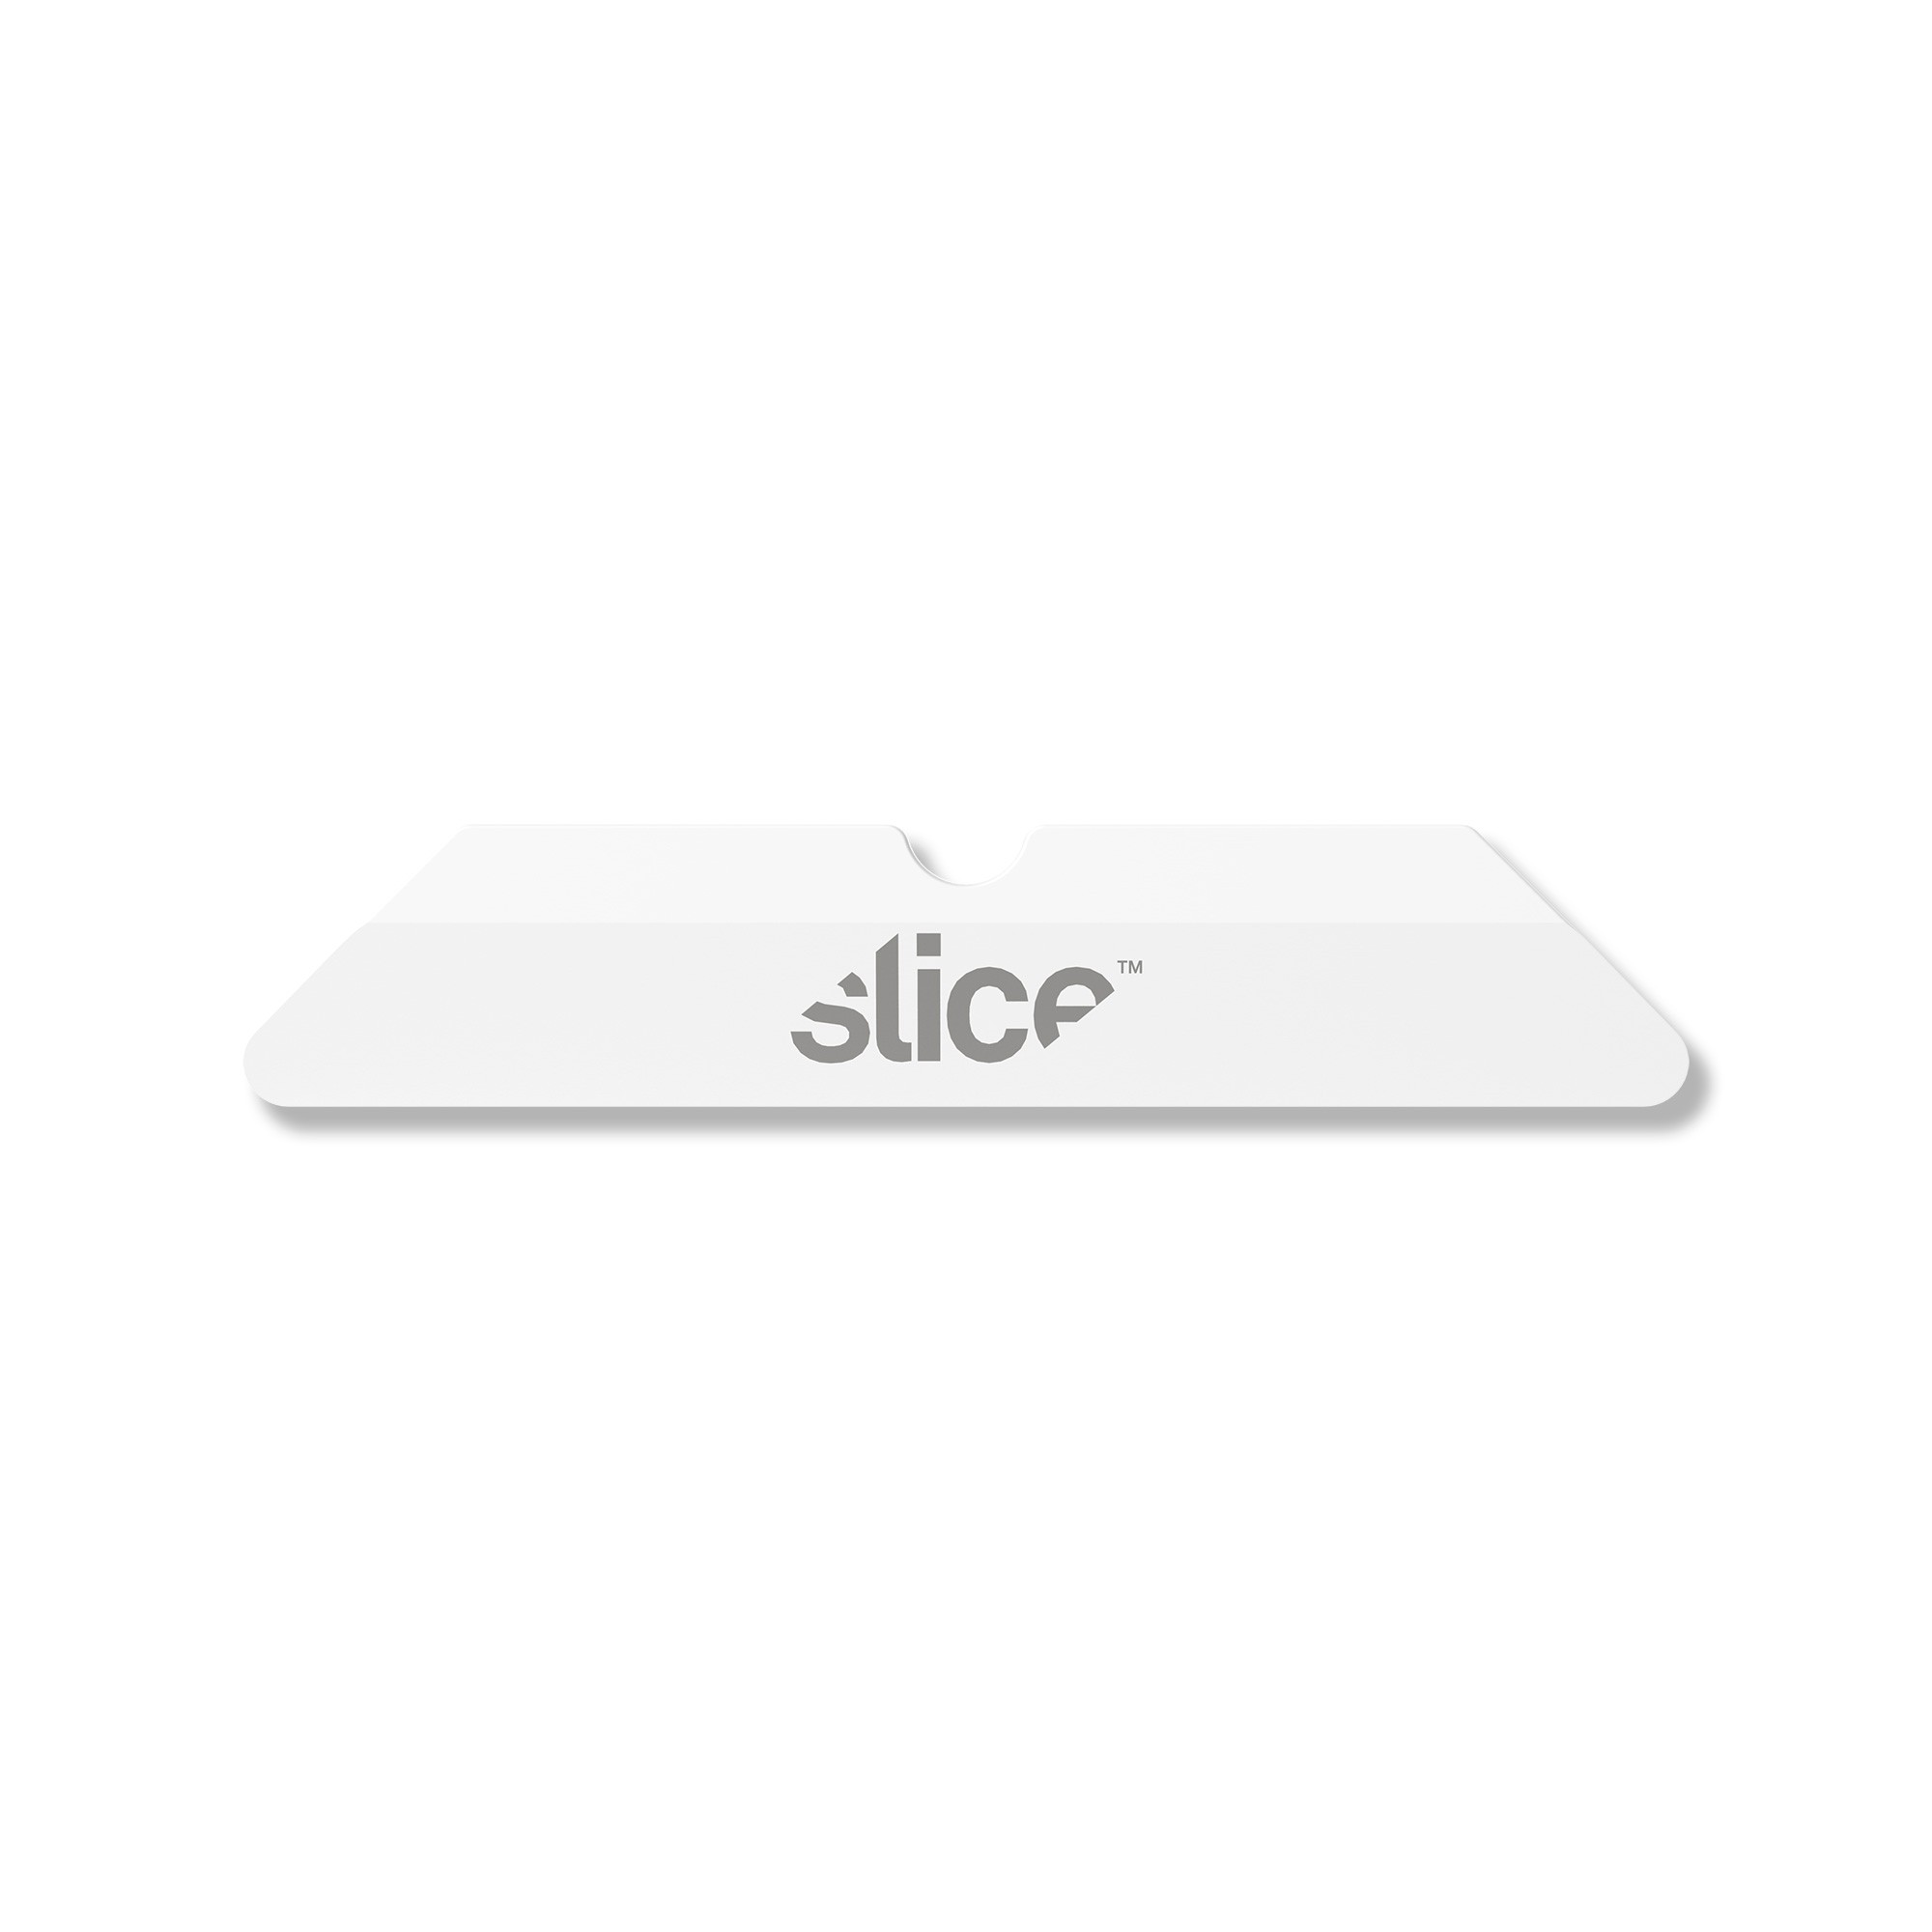 Slice Replacement Blades, Slice Box Cutter Blade, Ceramic, White, Rounded Tips (Pack of 4)